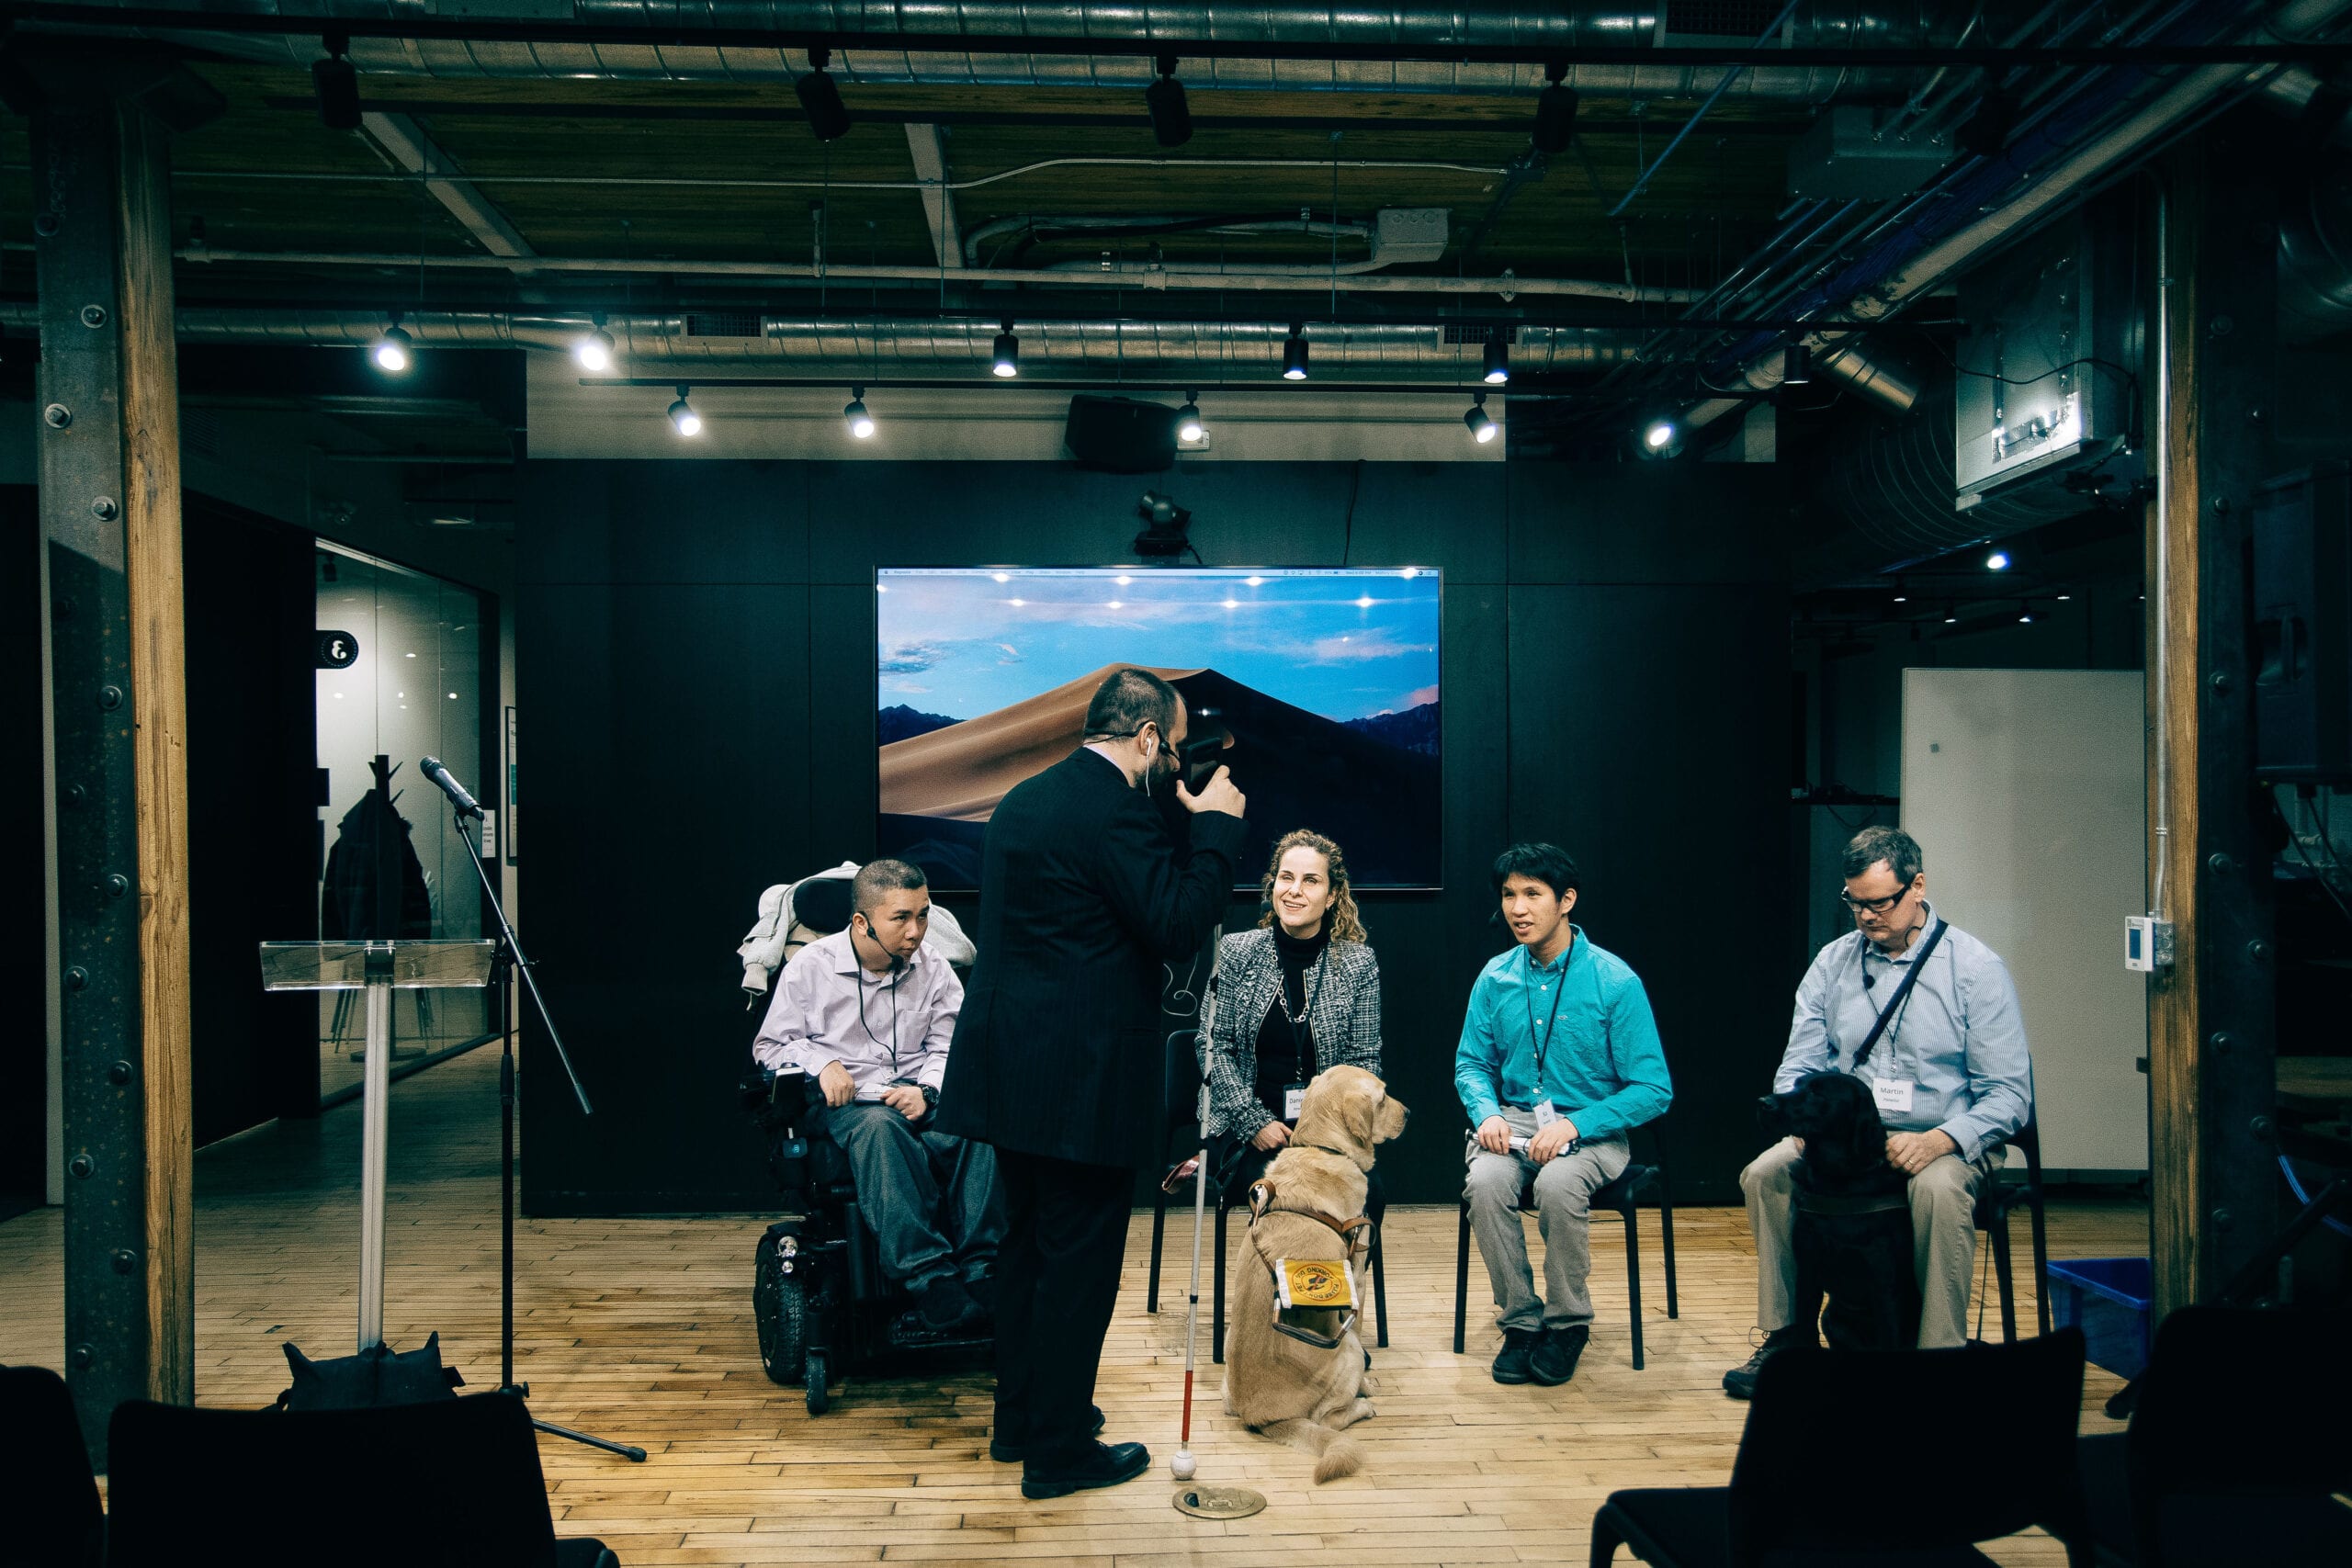 Sam, Vu, Daniella, Ka and Martin prepare on stage at Wealthsimple for an event in Feb of 2019